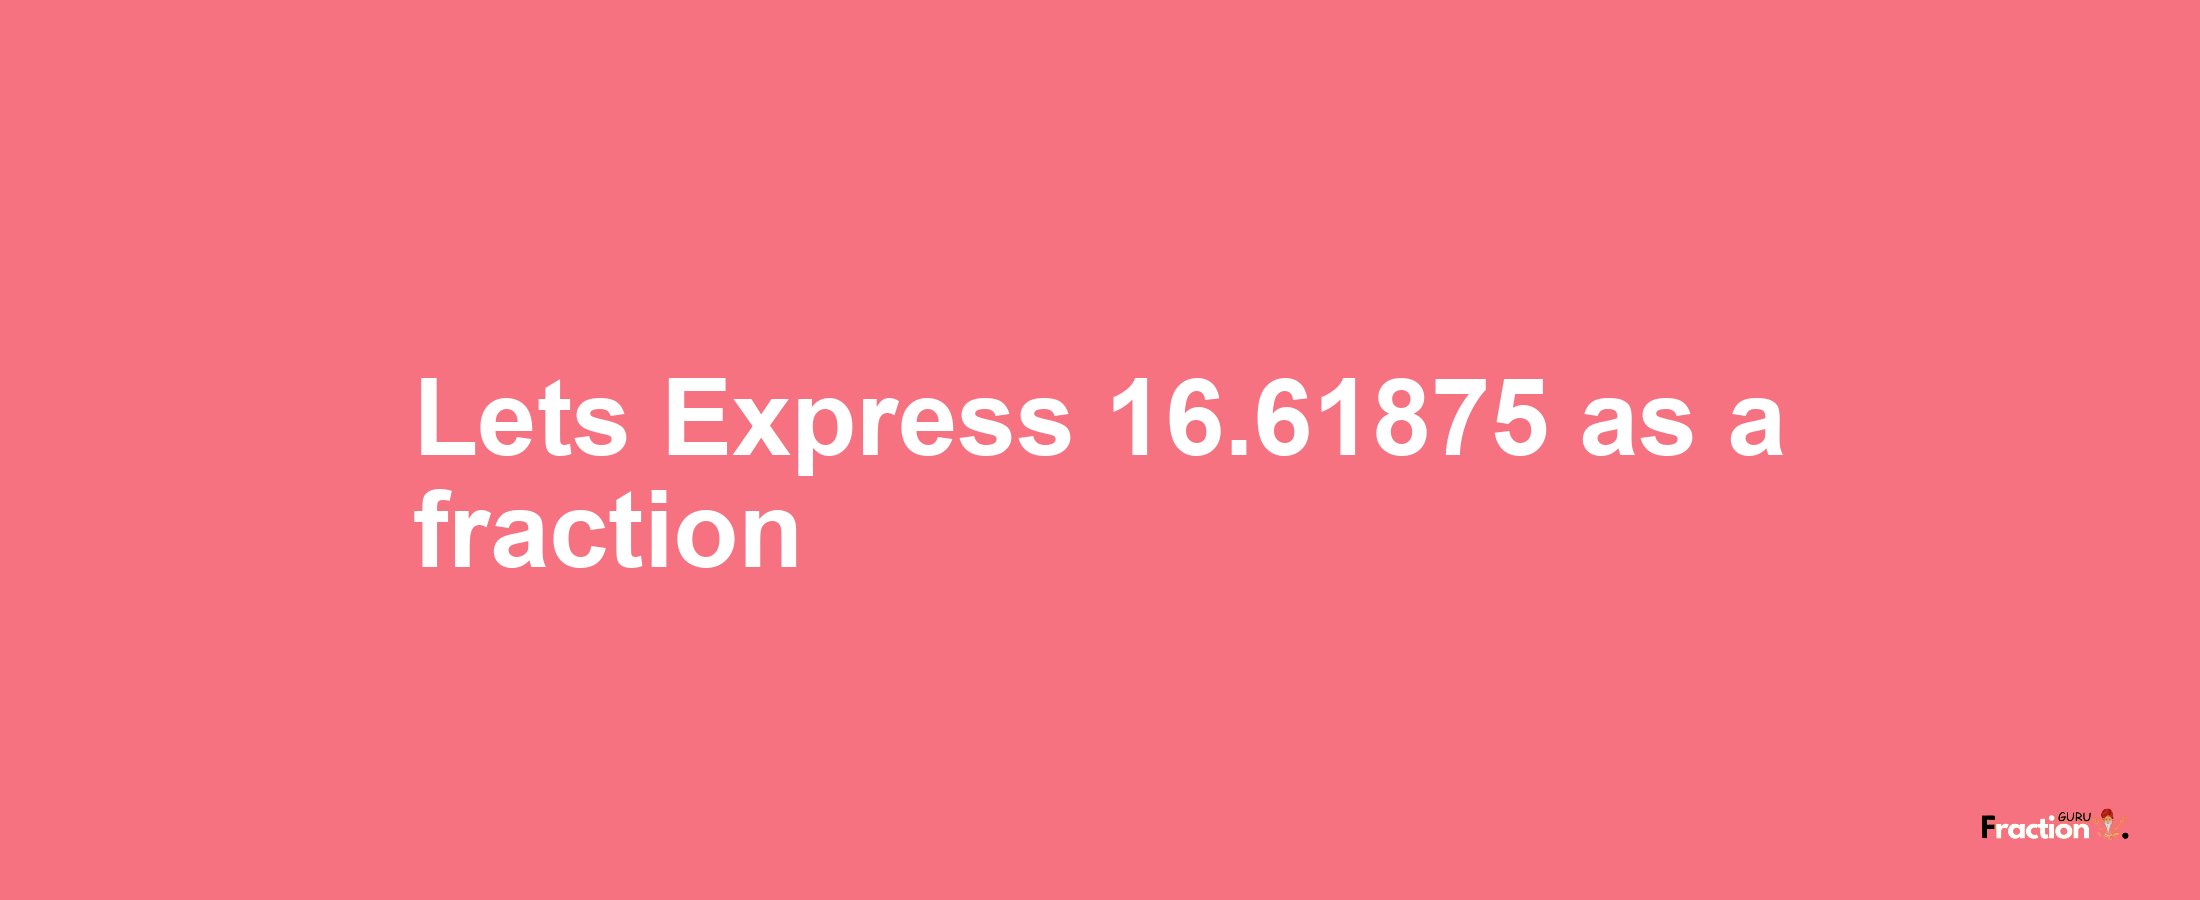 Lets Express 16.61875 as afraction